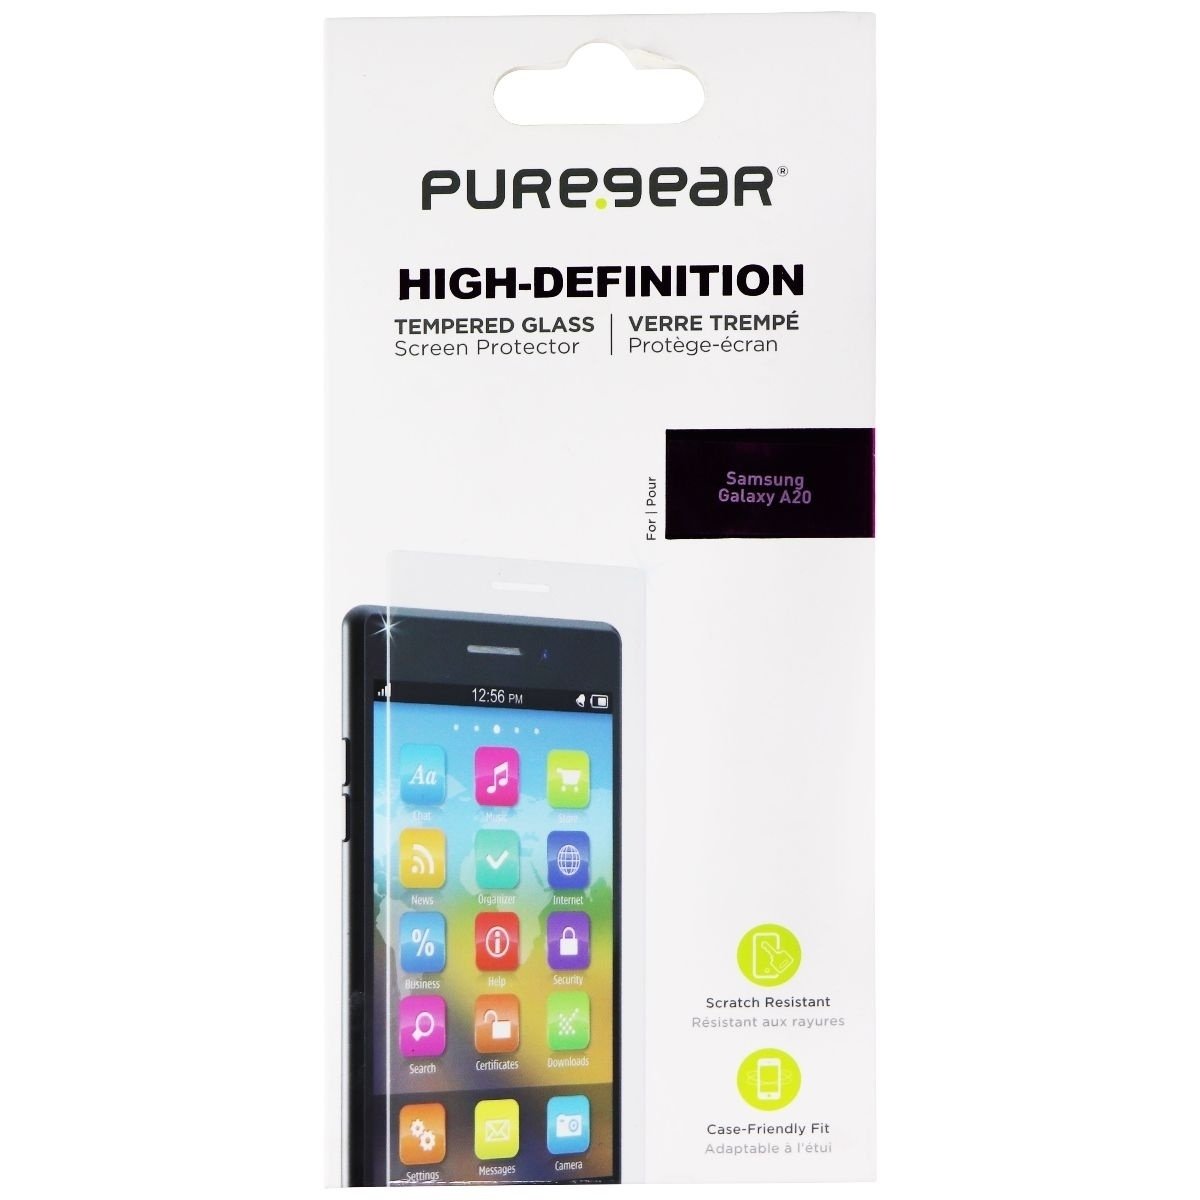 PureGear High-Definition Tempered Glass For Samsung Galaxy A20 - Clear